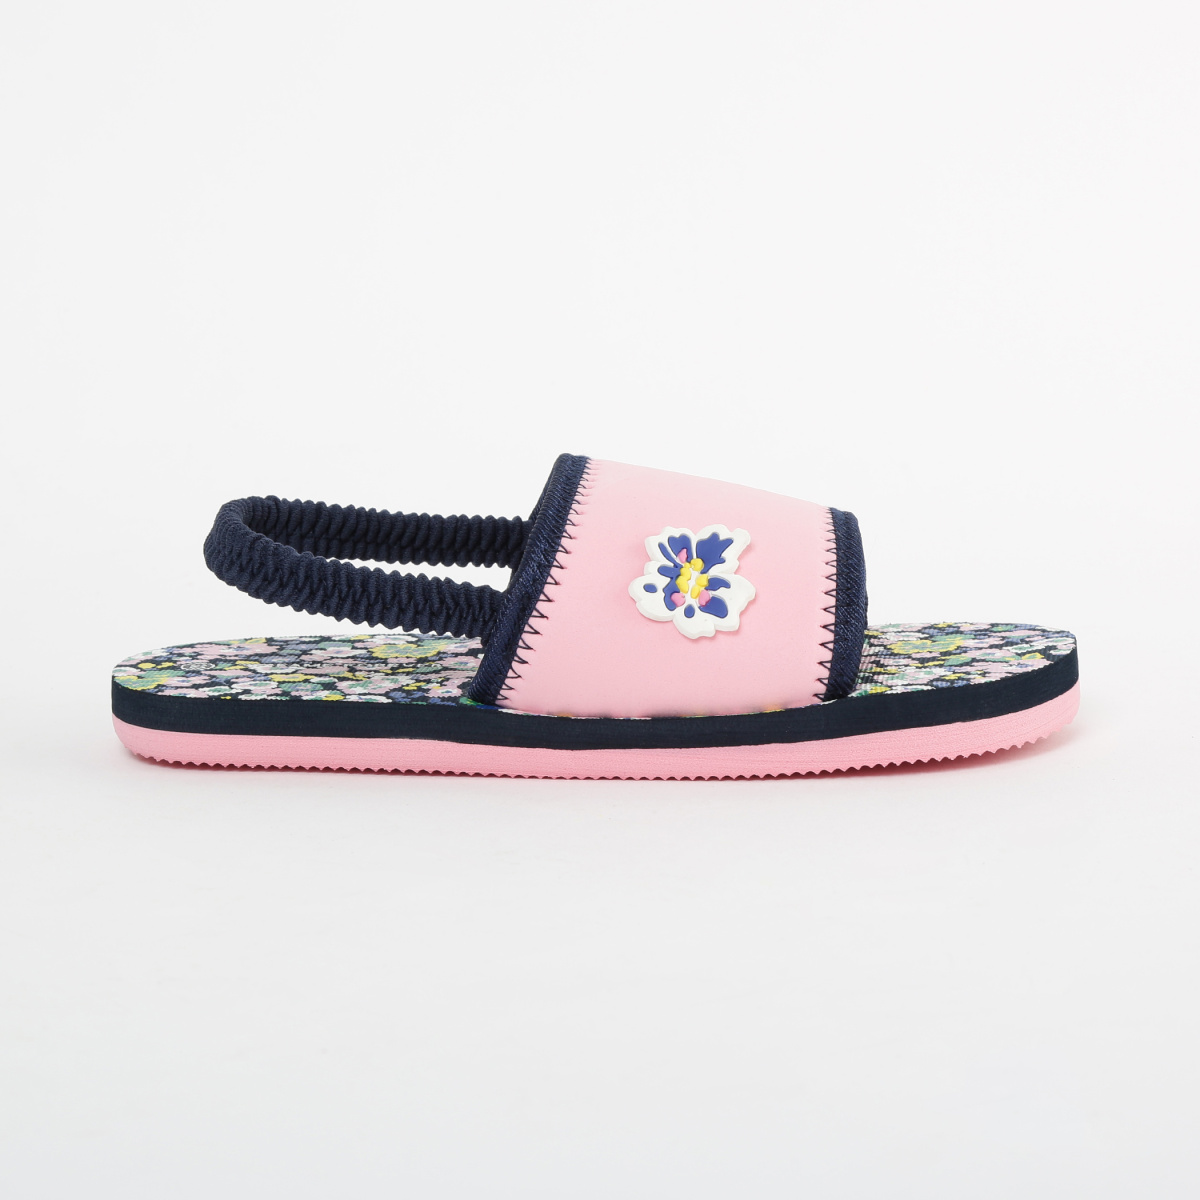 FAME FOREVER Floral Print Slingback Slippers with Applique